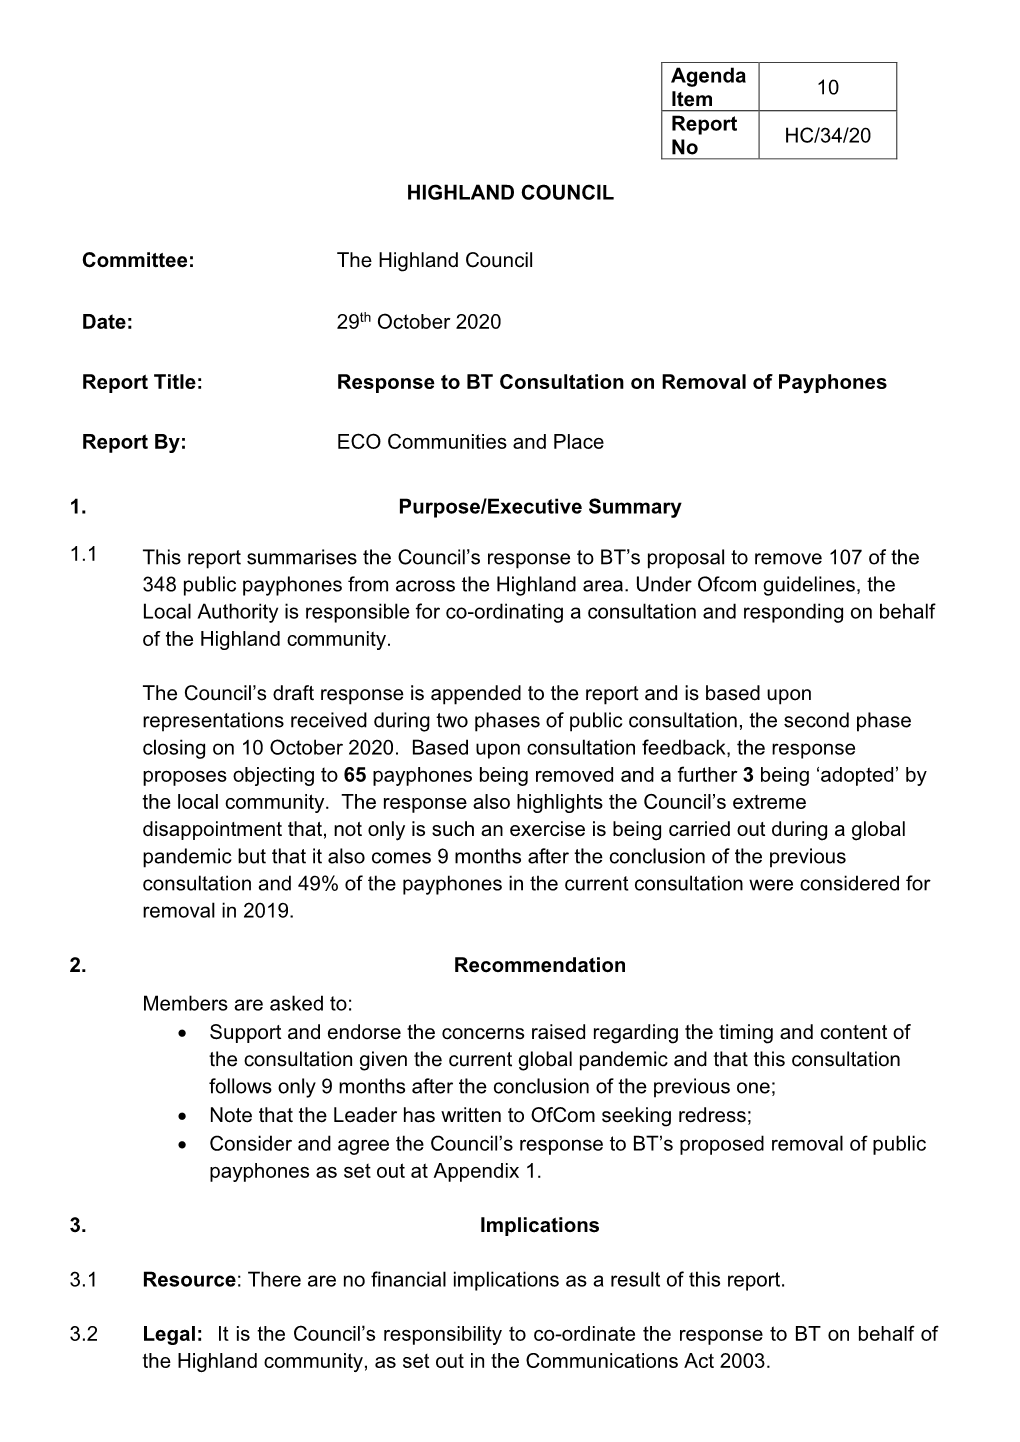 Item 10 Response to BT Consultation on Removal Of